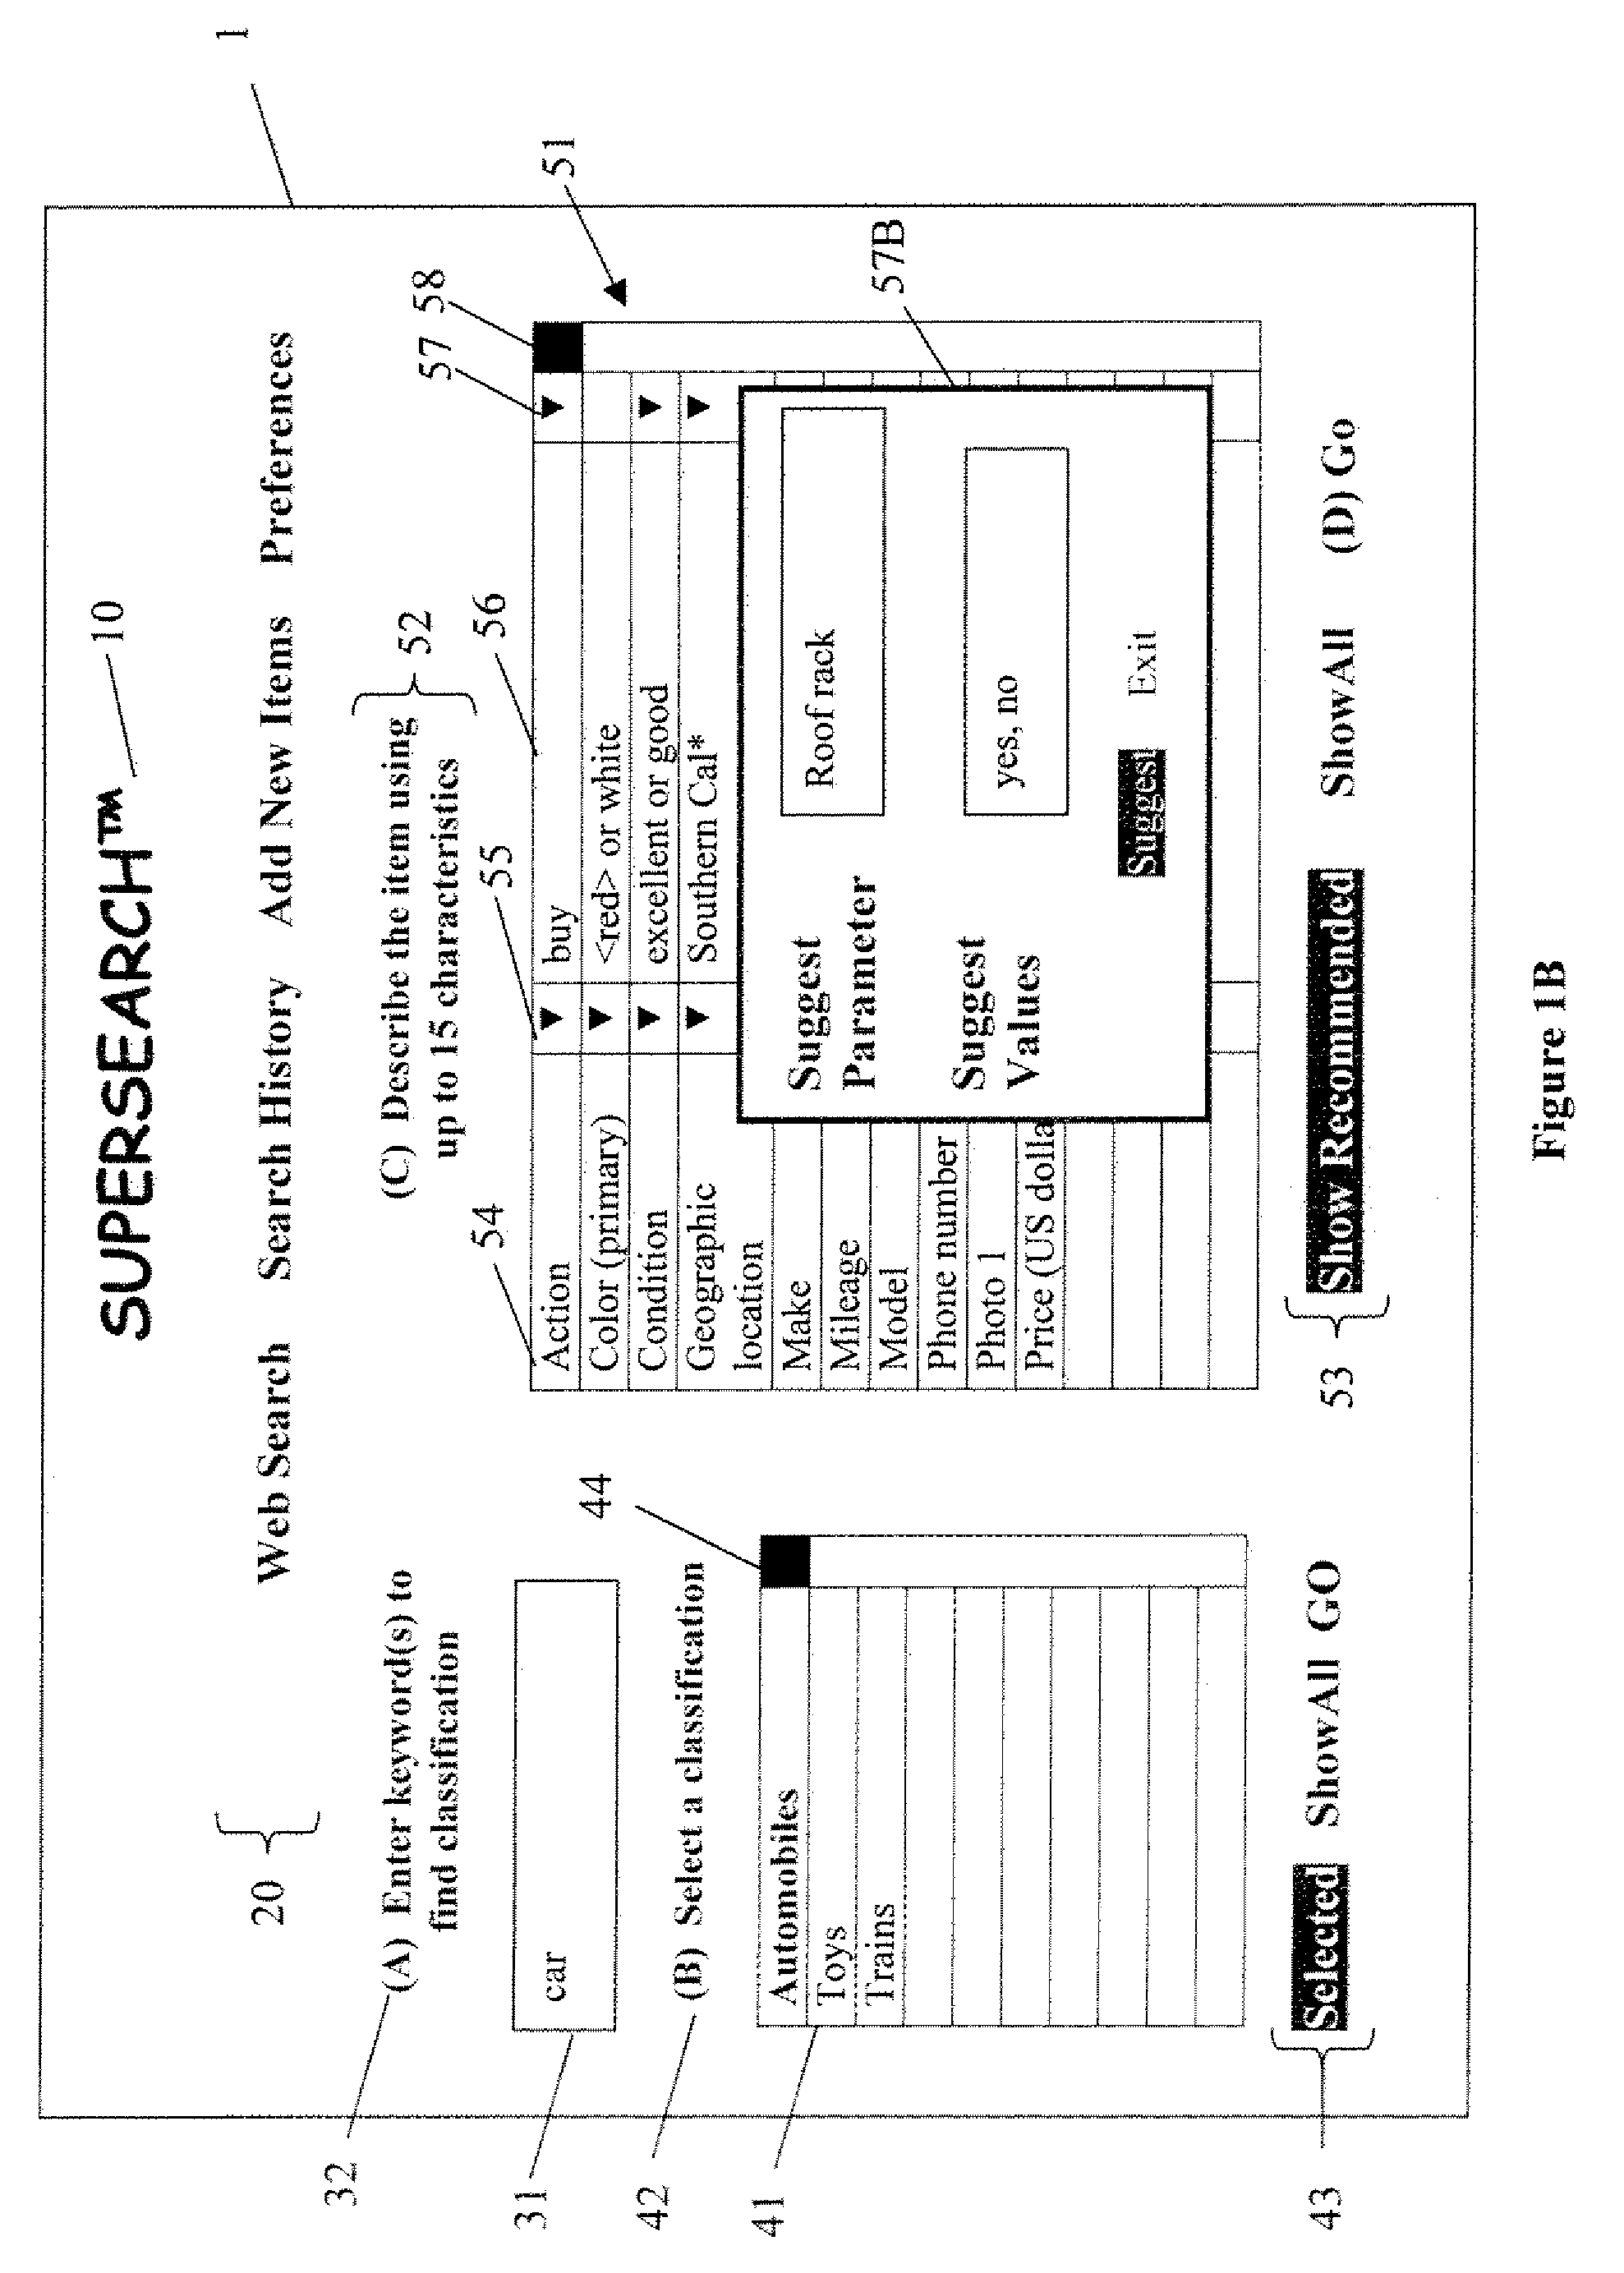 Systems And Methods For Storing And Retrieving Goods And Services Information Using Parameter/Value Databases